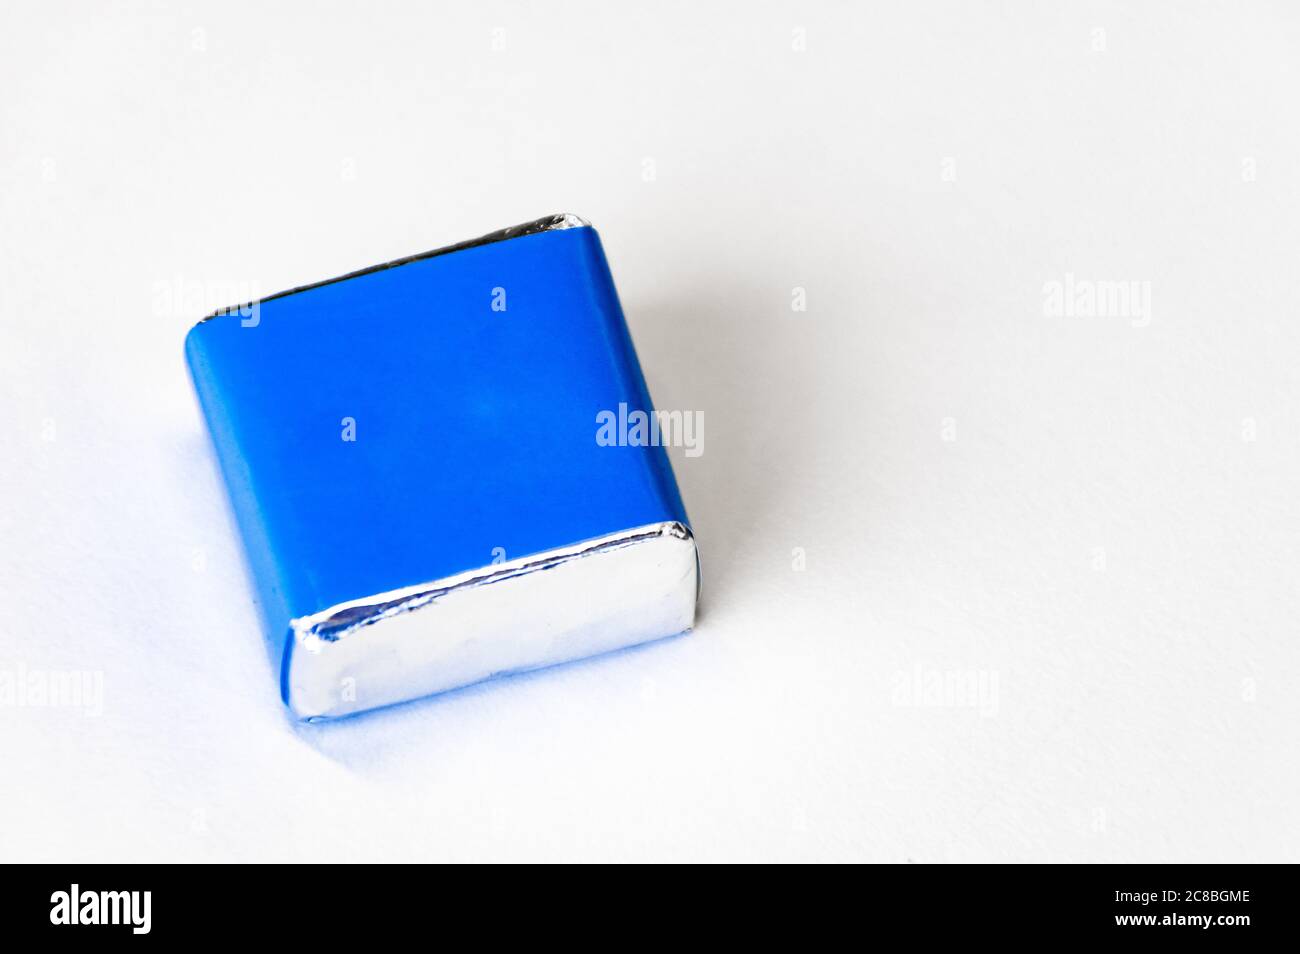 Blue cube on a white background, empty background on the right side for text Stock Photo